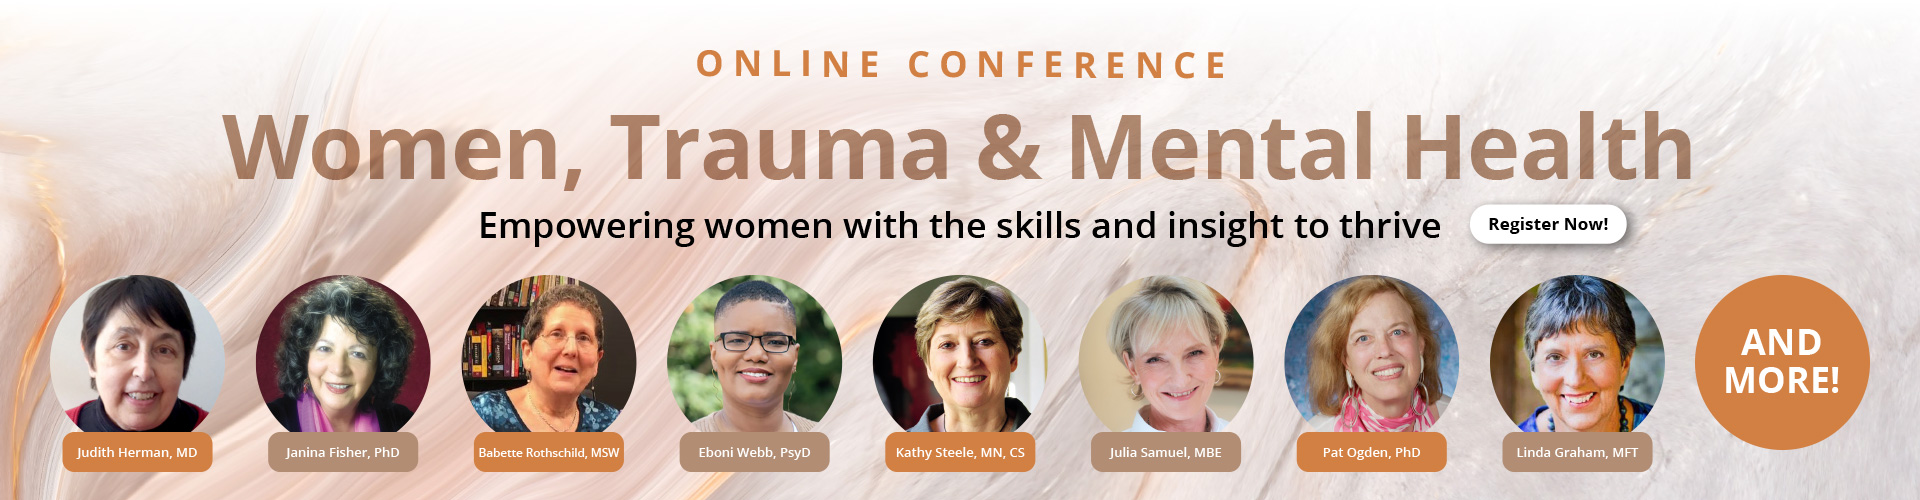 Women, Trauma and Mental Health Master Conference Series: Empowering women with the skills and insight to thrive